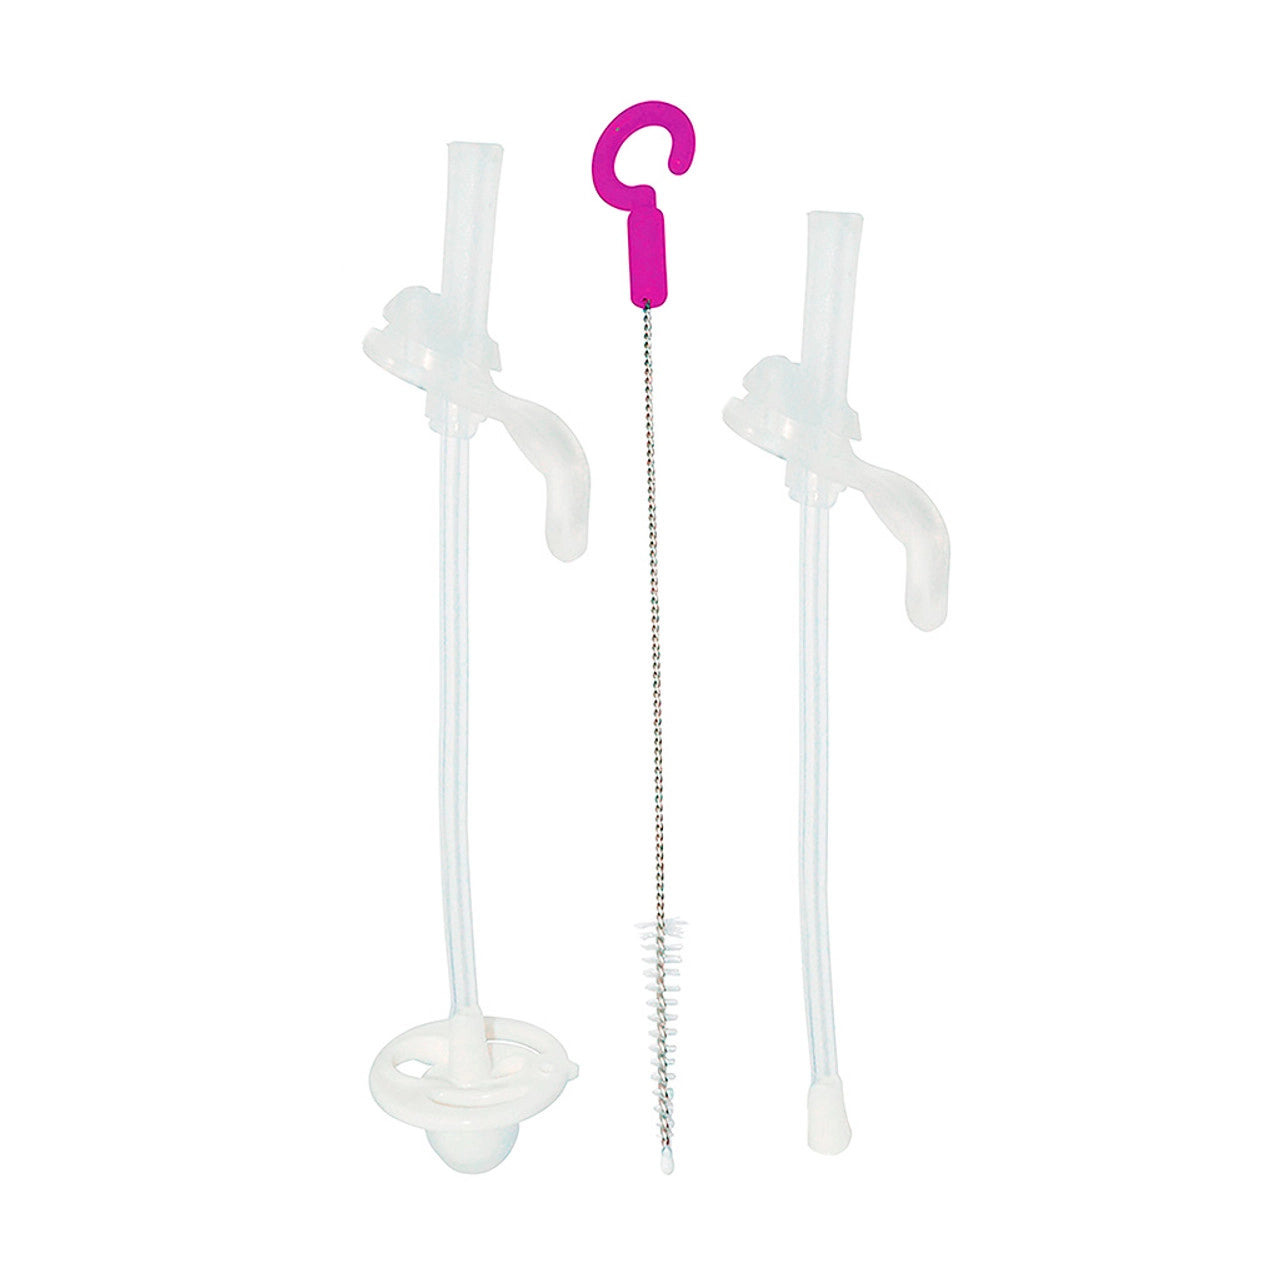 B.Box Sippy Cup V2 Replacement Straw & Cleaner Pack